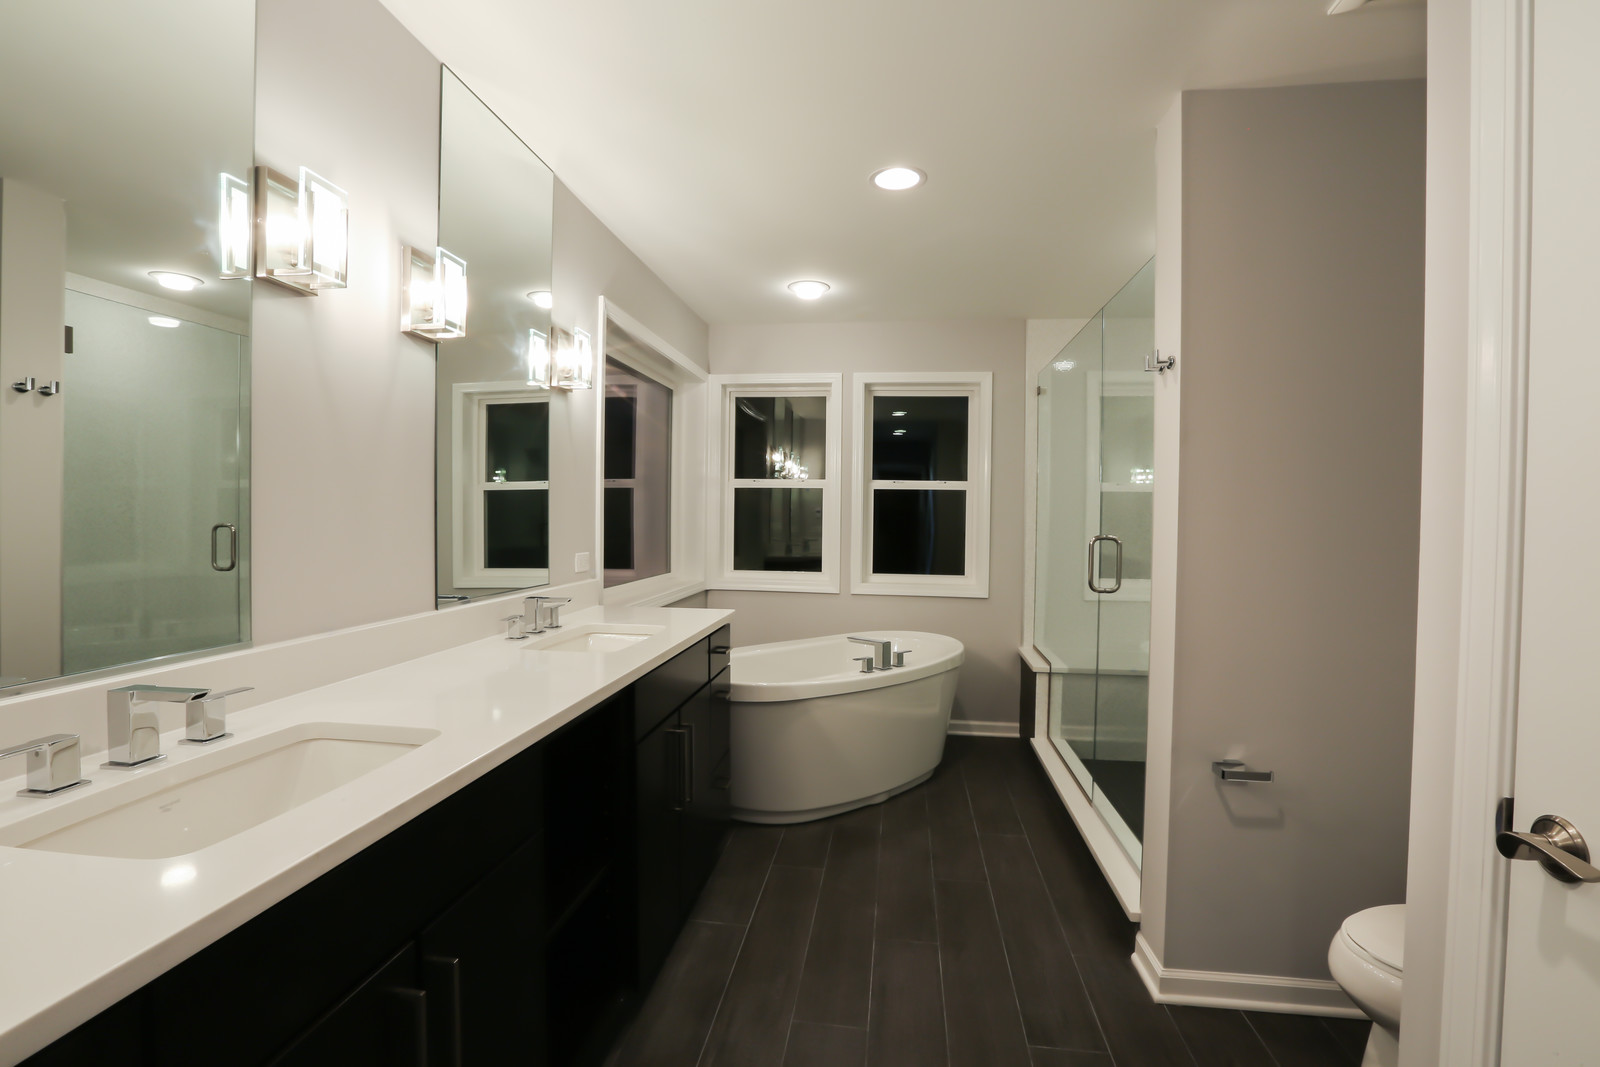 An Image Of New Vinyl Flooring In A Bathroom Put On By Palouse Flooring